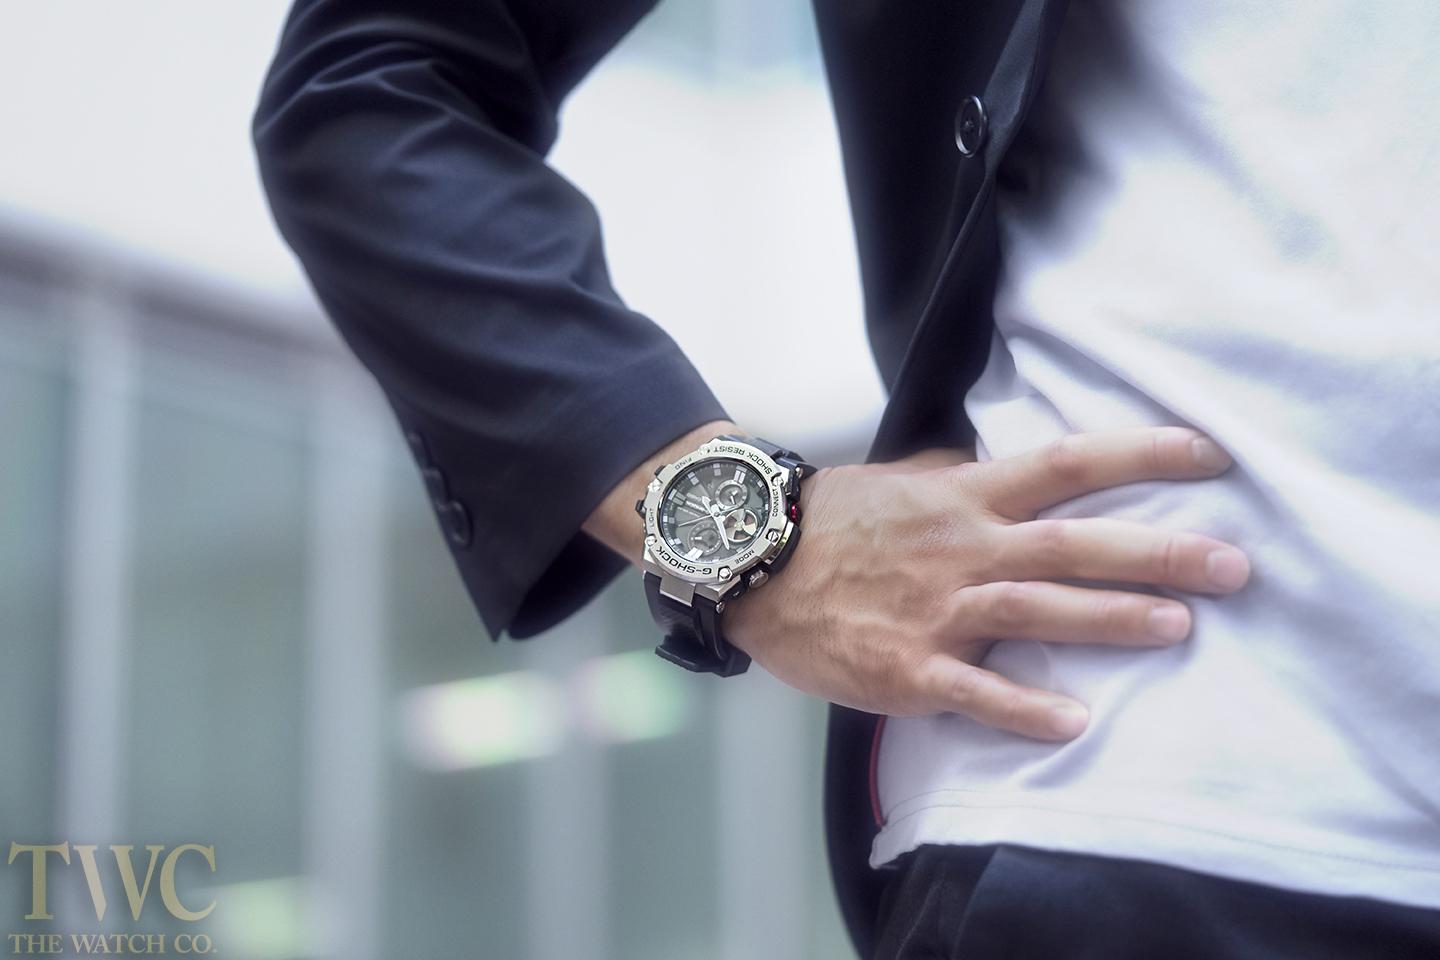 Premium Casio Watches Every Man On Budget Should Have - The Watch Company